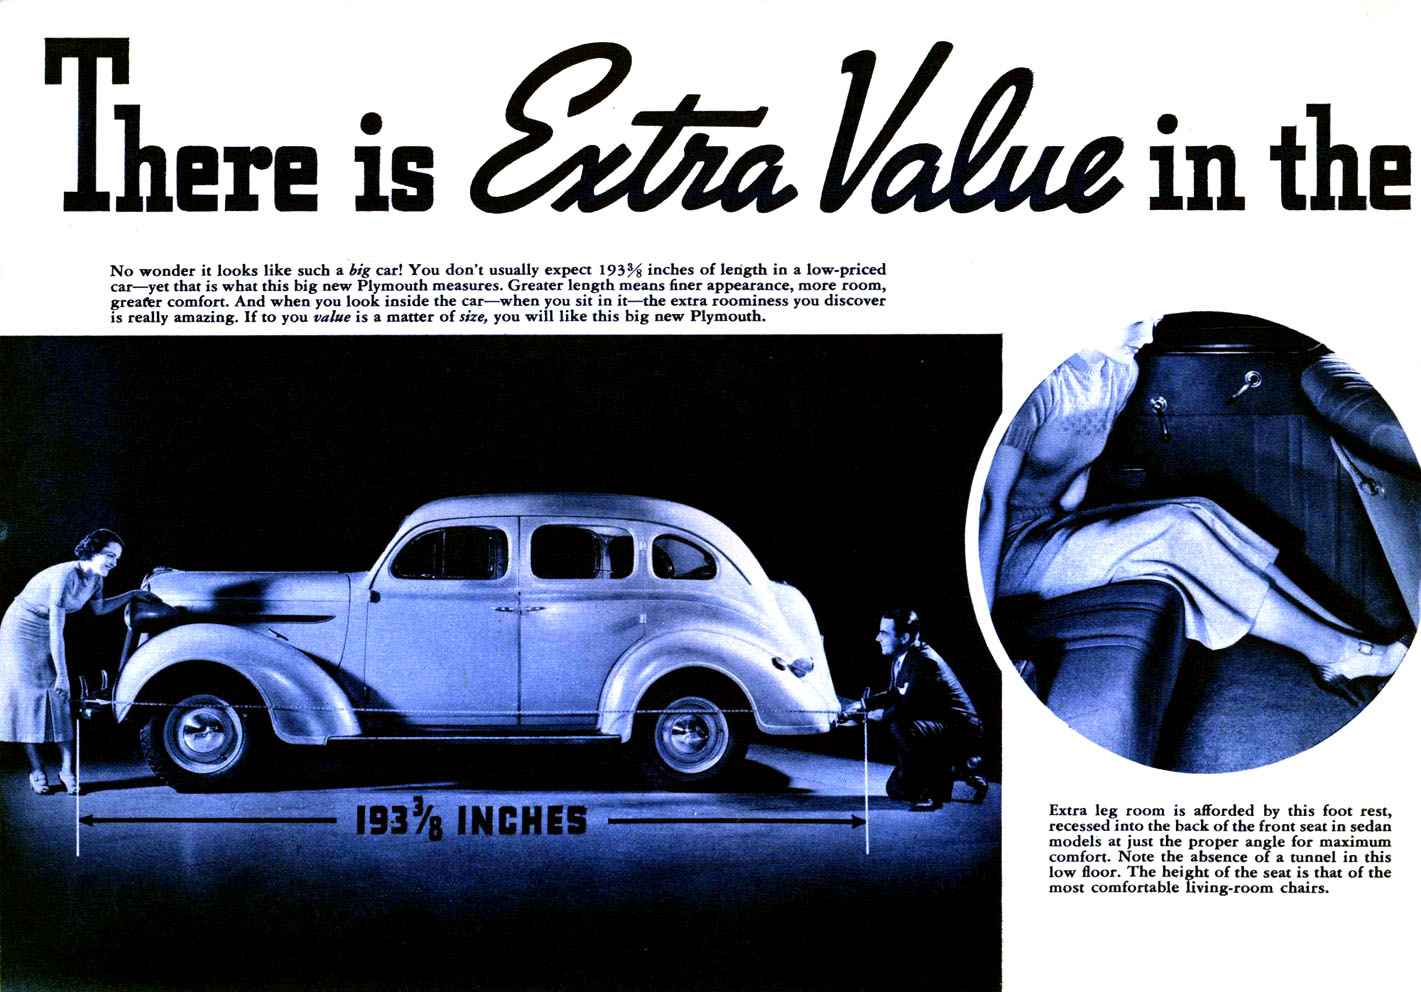 1937_Plymouth_Biggest_Value-04